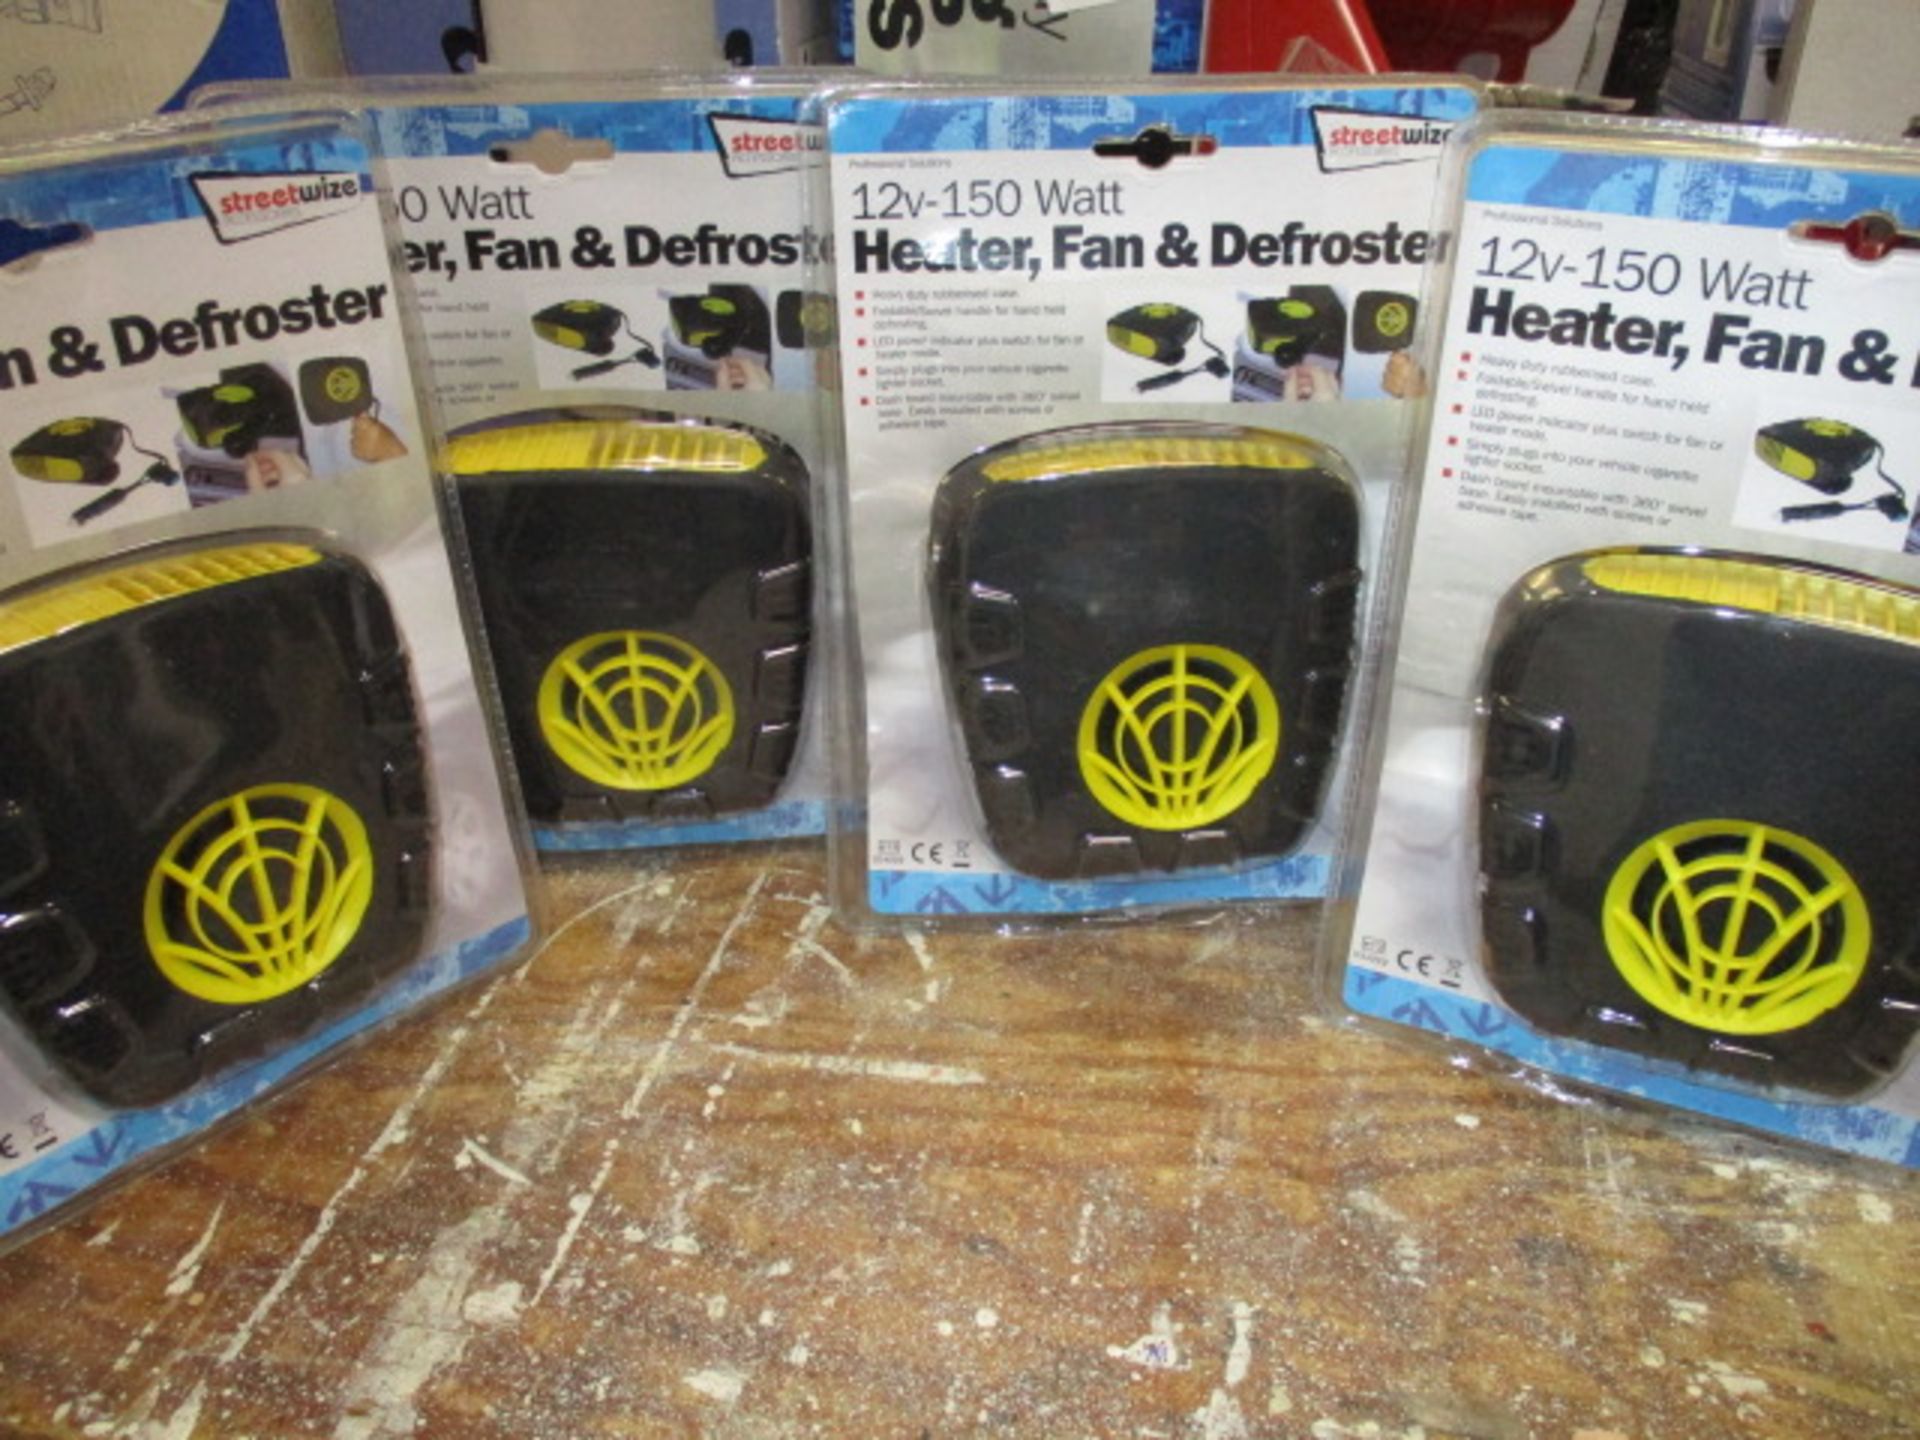 4 Streetwize brand new 12V heater fan and defroster units all new